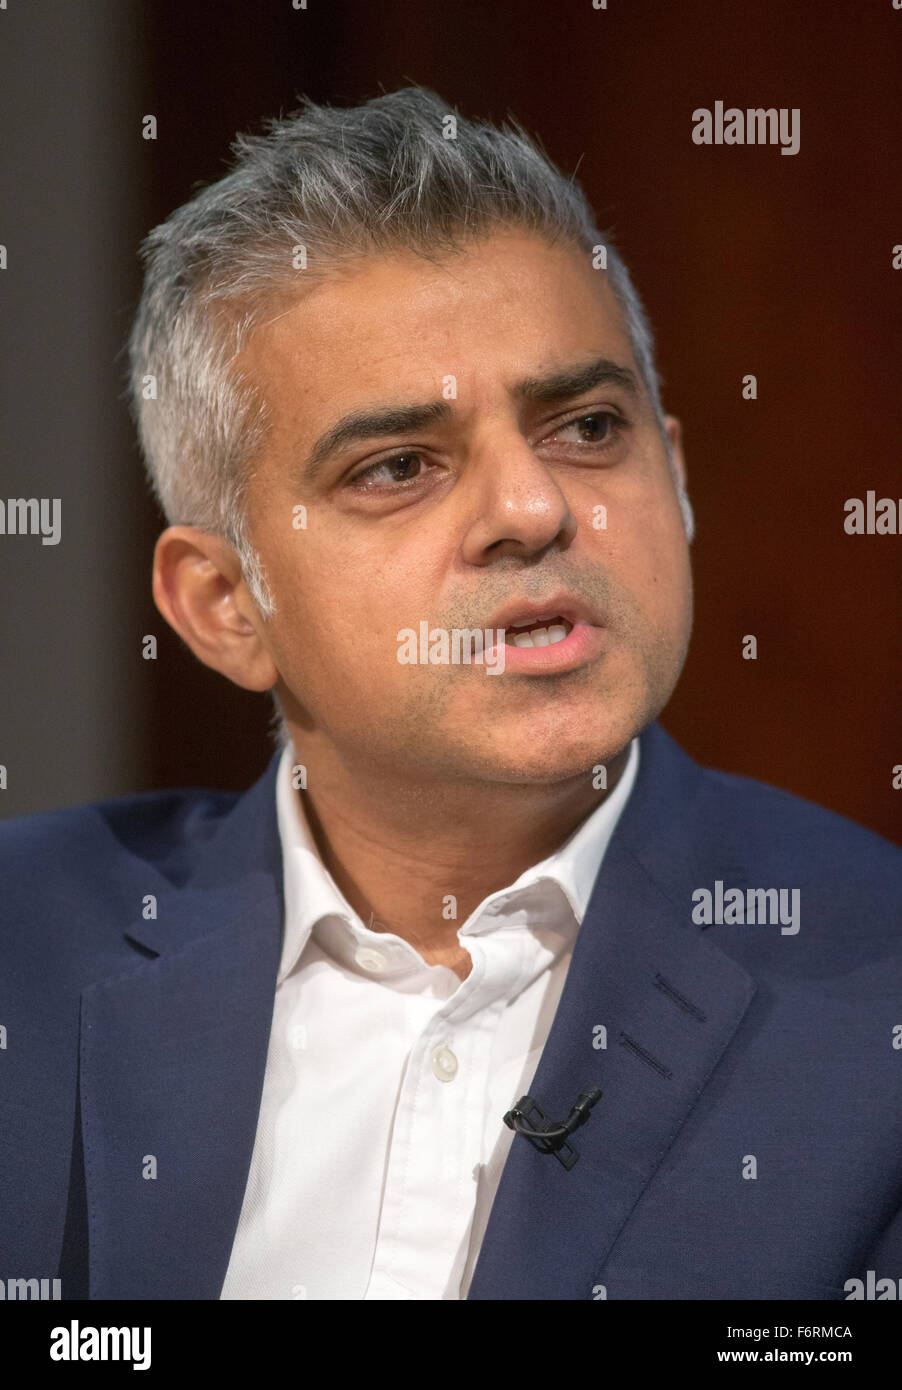 London Mayoral candidate for Labour,Sadiq Khan,speaks at an event about his plans for London,if elected Stock Photo